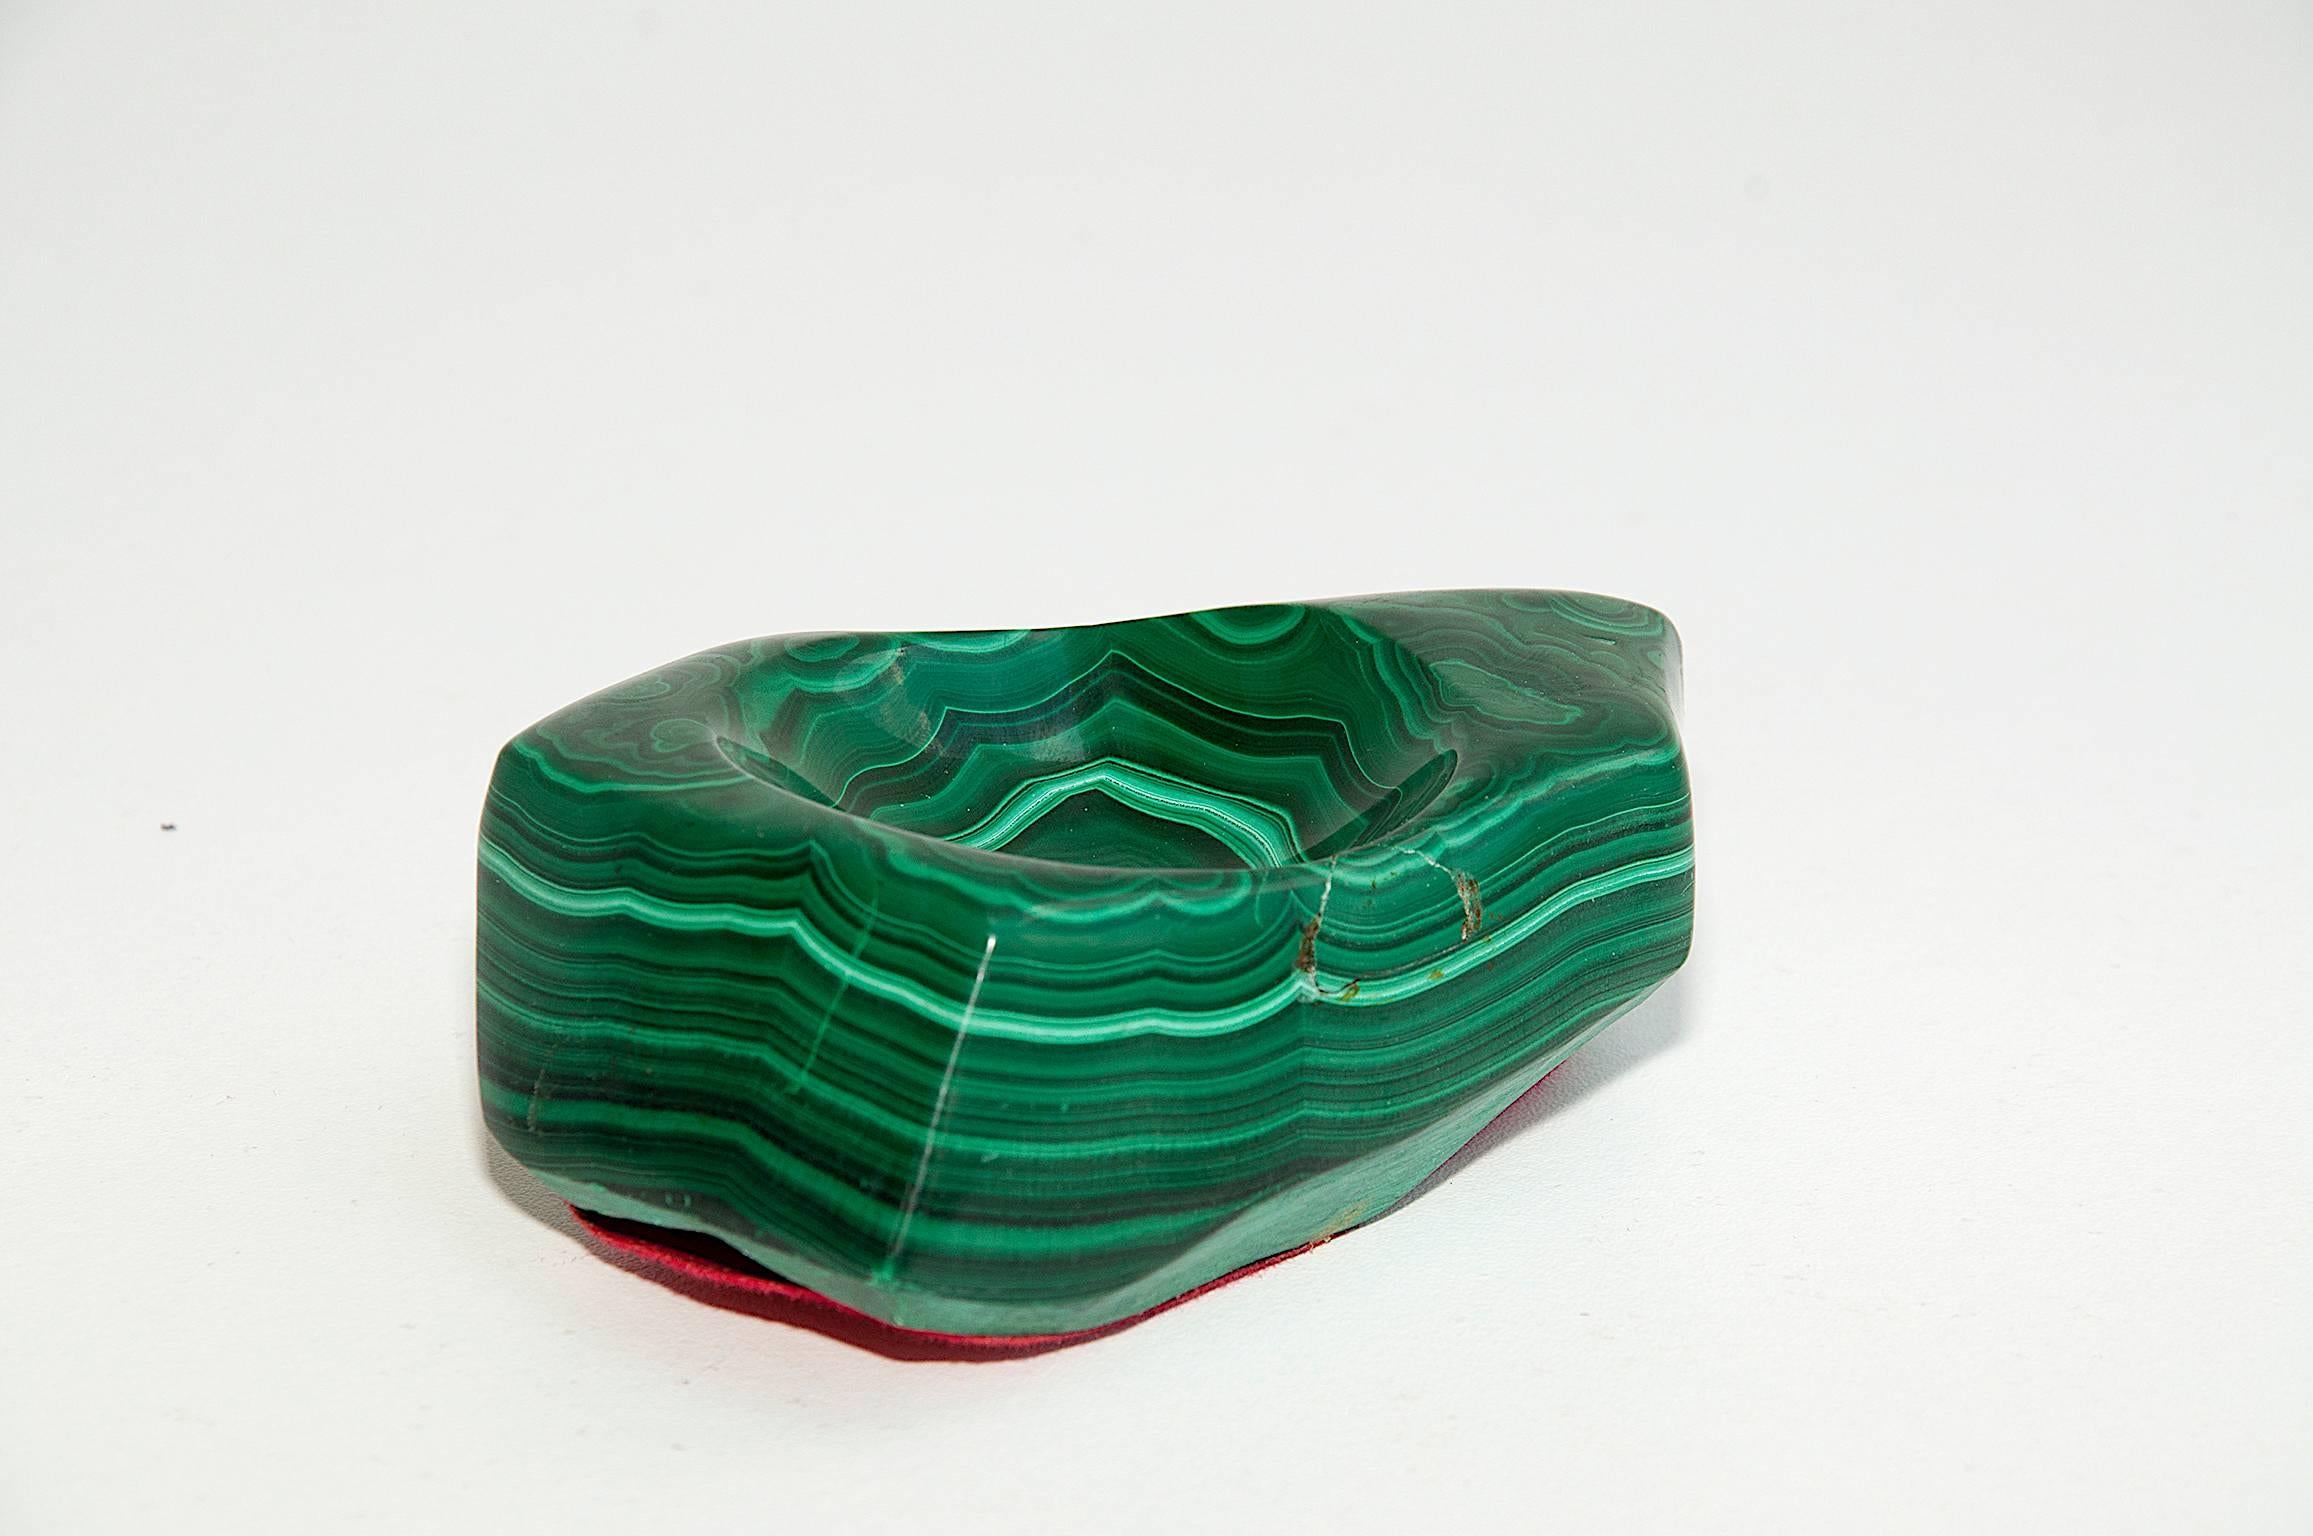 Rococo Revival Ashtray with an Egg in Malachite